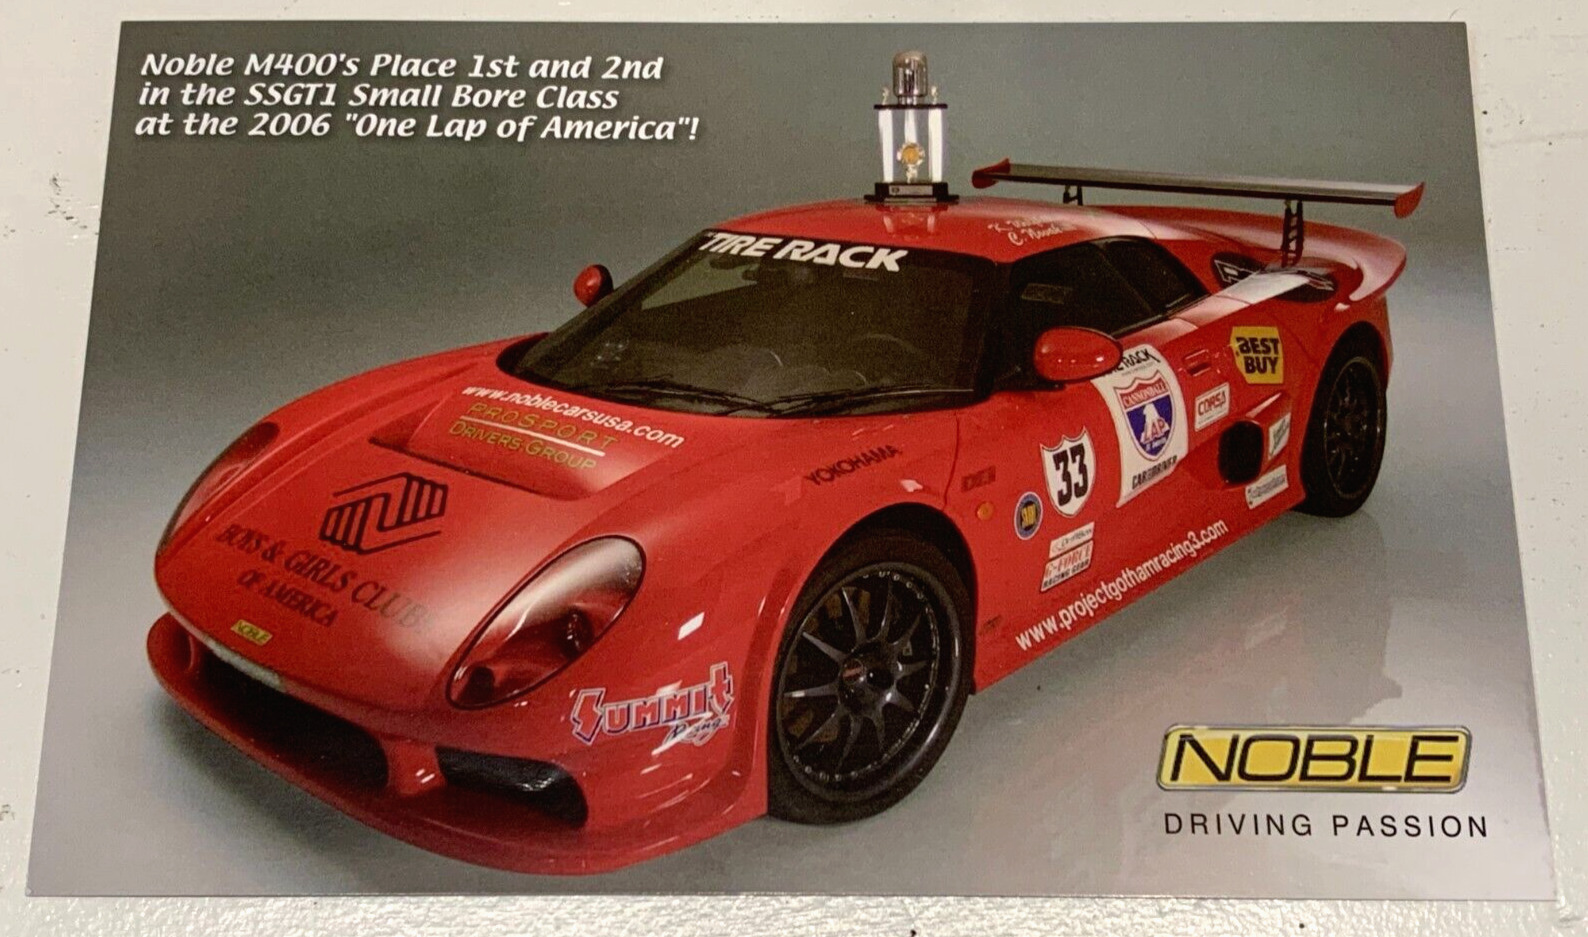 NOBLE M400 AND M12 PROMOTIONAL CARD FLYER 5.5×8.5